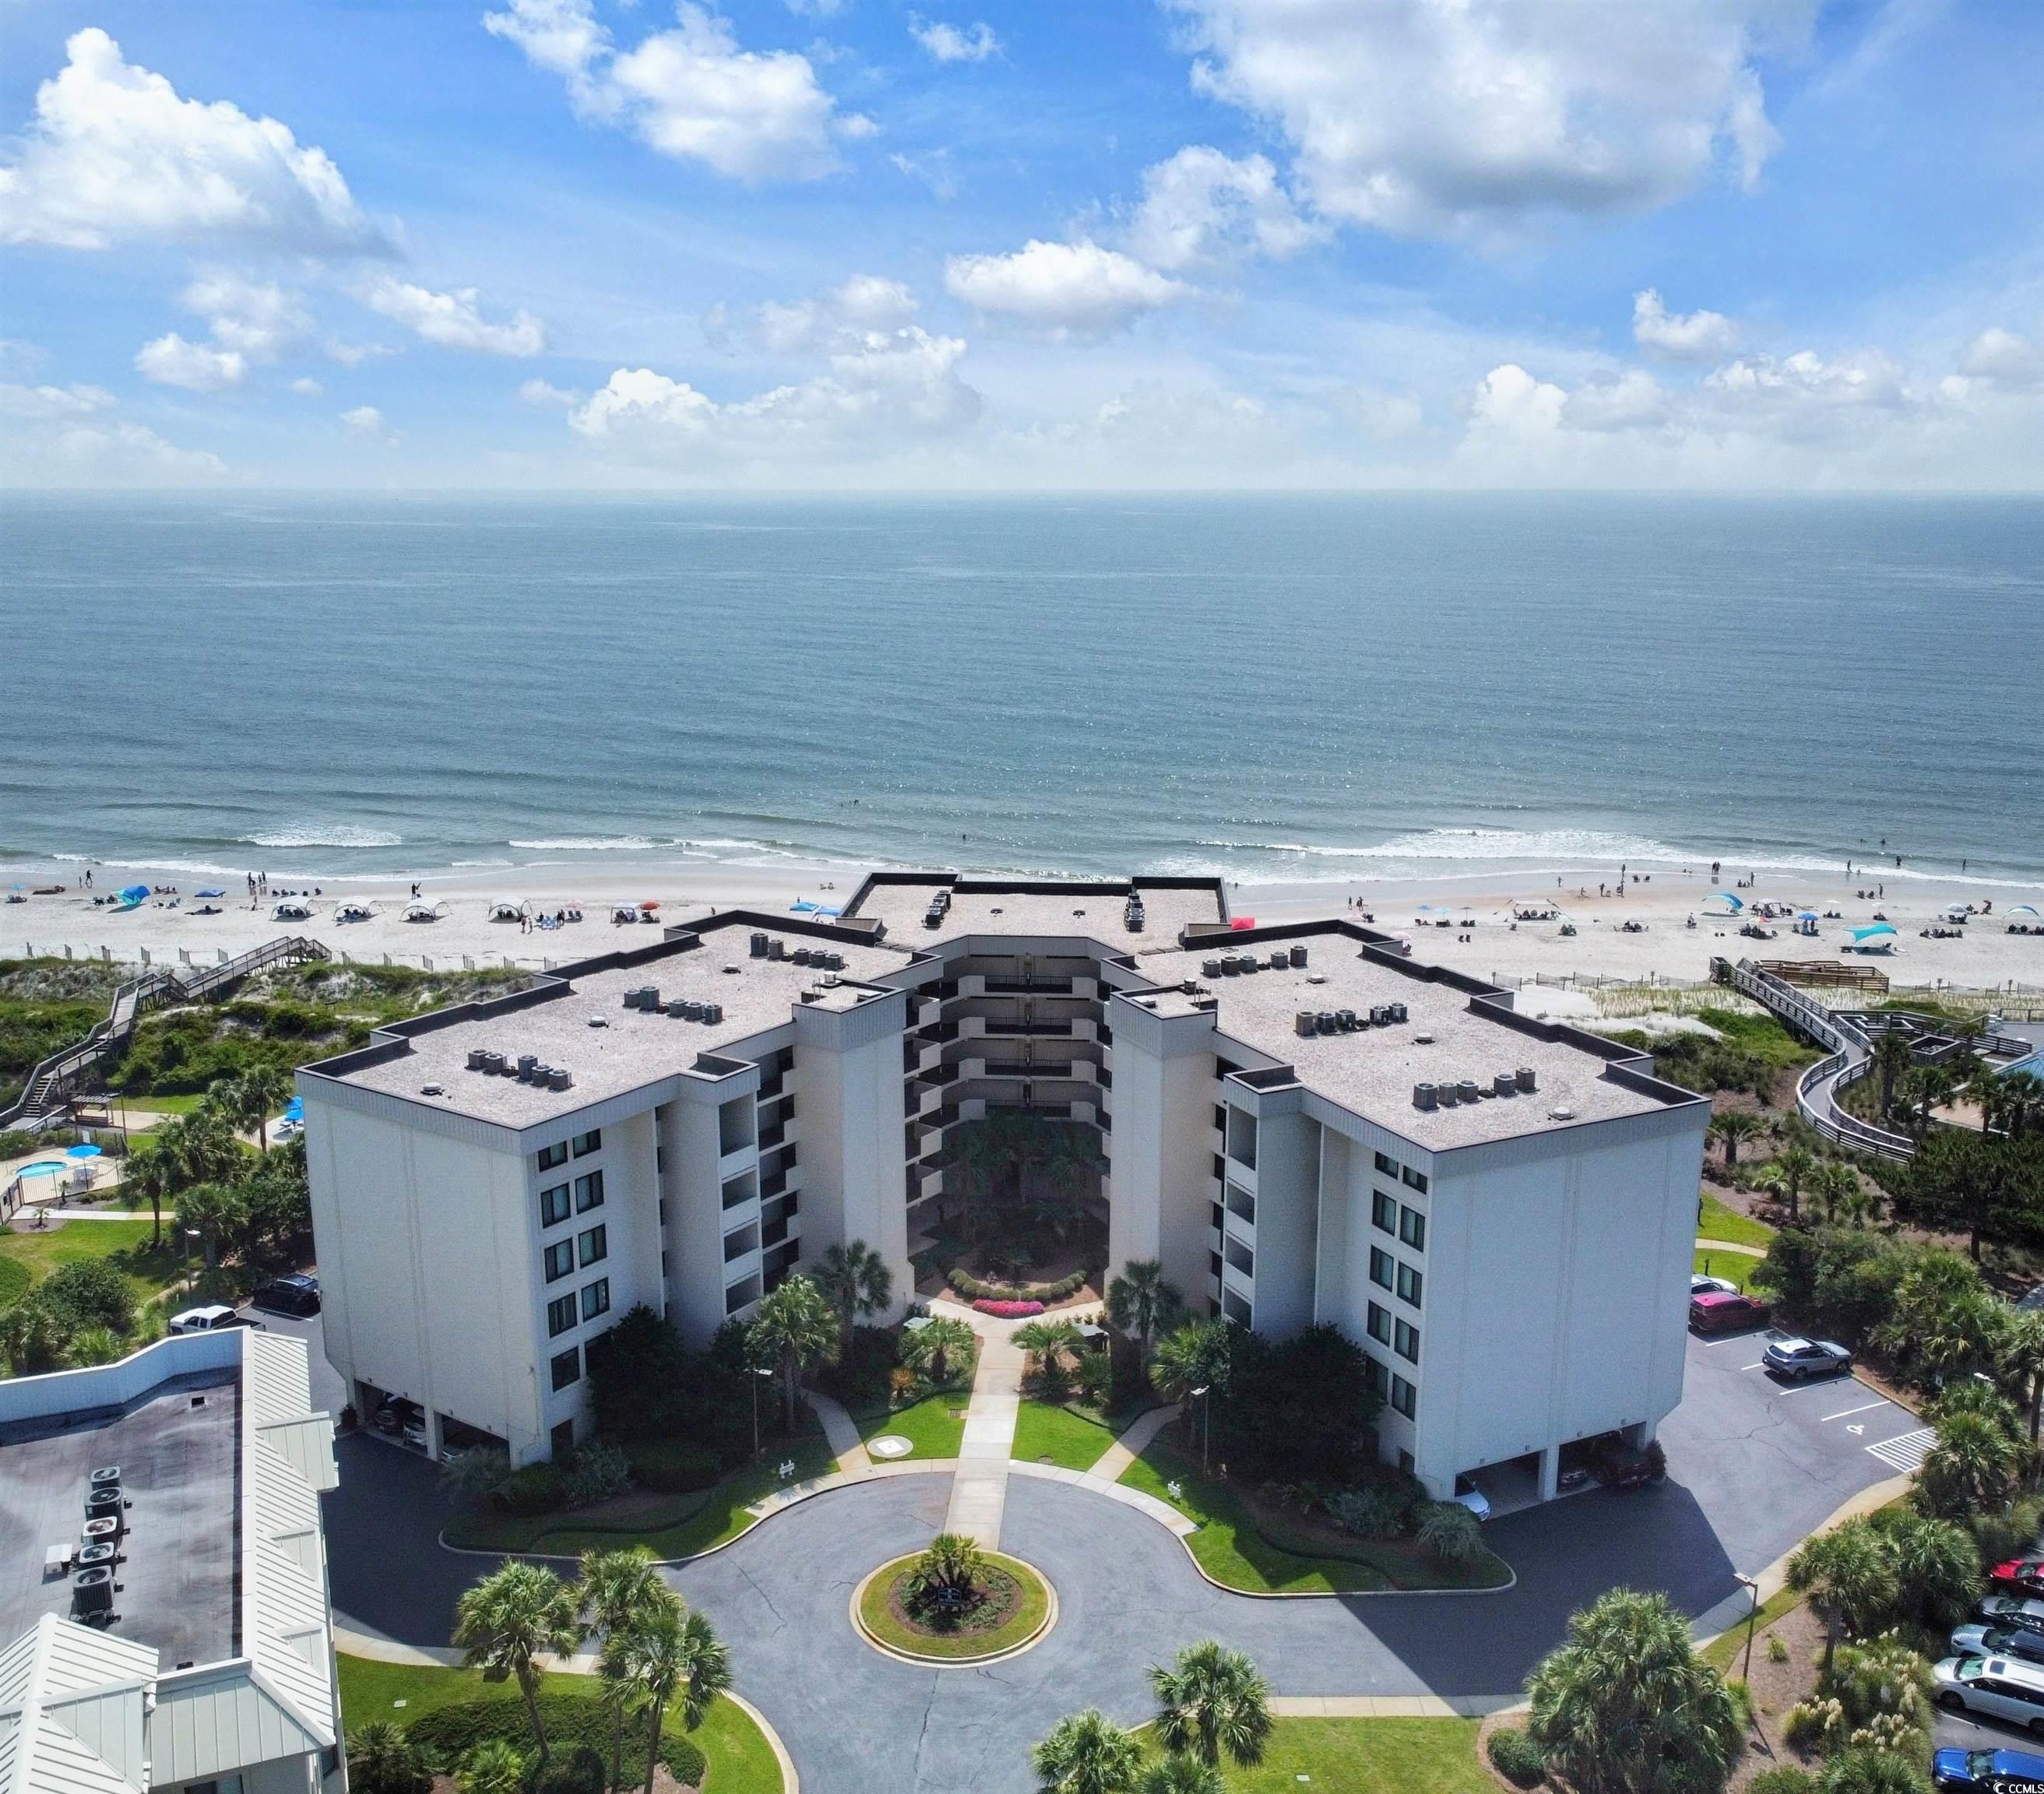 looking for your piece of beach paradise? look no further with this 4 week, oceanfront interval in sandpiper run. sandpiper run b3c interval 6 is a 3 bedroom/ 2 bath overlooking the pool complex and the picturesque atlantic ocean. the covered balcony, living room and master bedroom each allow you to take in the tranquil ocean views. this beautifully decorated condominium comes fully equipped and furnished.  the spacious master bedroom offers a king size bed and walk-in closet. large outdoor pool, hot tub, and grilling area within steps of the beach. tennis courts, walking paths, fishing and more for litchfield by the sea owners and guests. surrounded by amazing restaurants, golf courses, brookgreen gardens and more. less than 10 miles to the marshwalk in murrells inlet and less than a 70 mile drive to charleston.